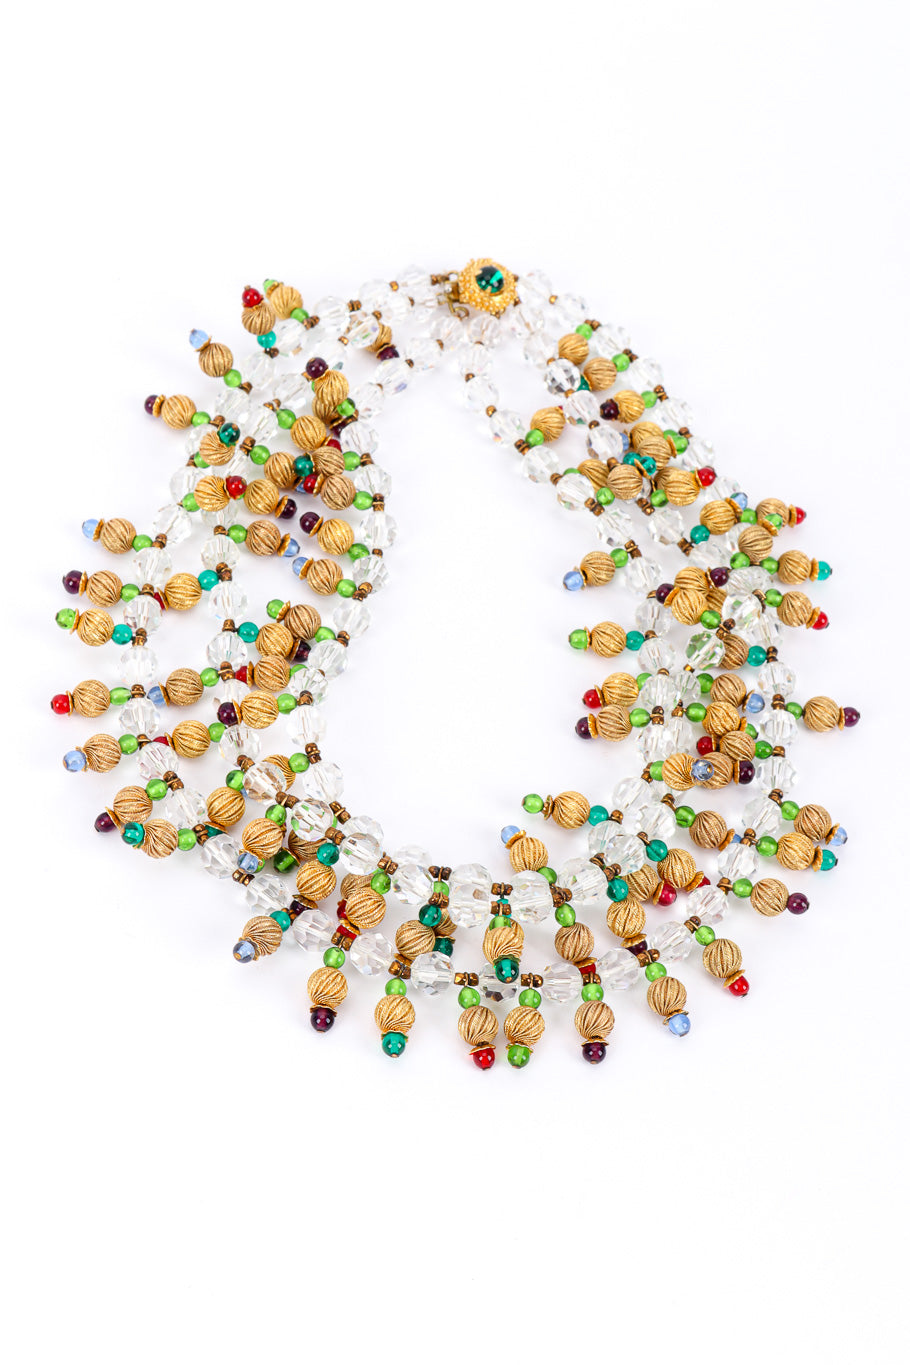 Vintage 3-Strand Beaded Necklace front view on a white backdrop @Recessla